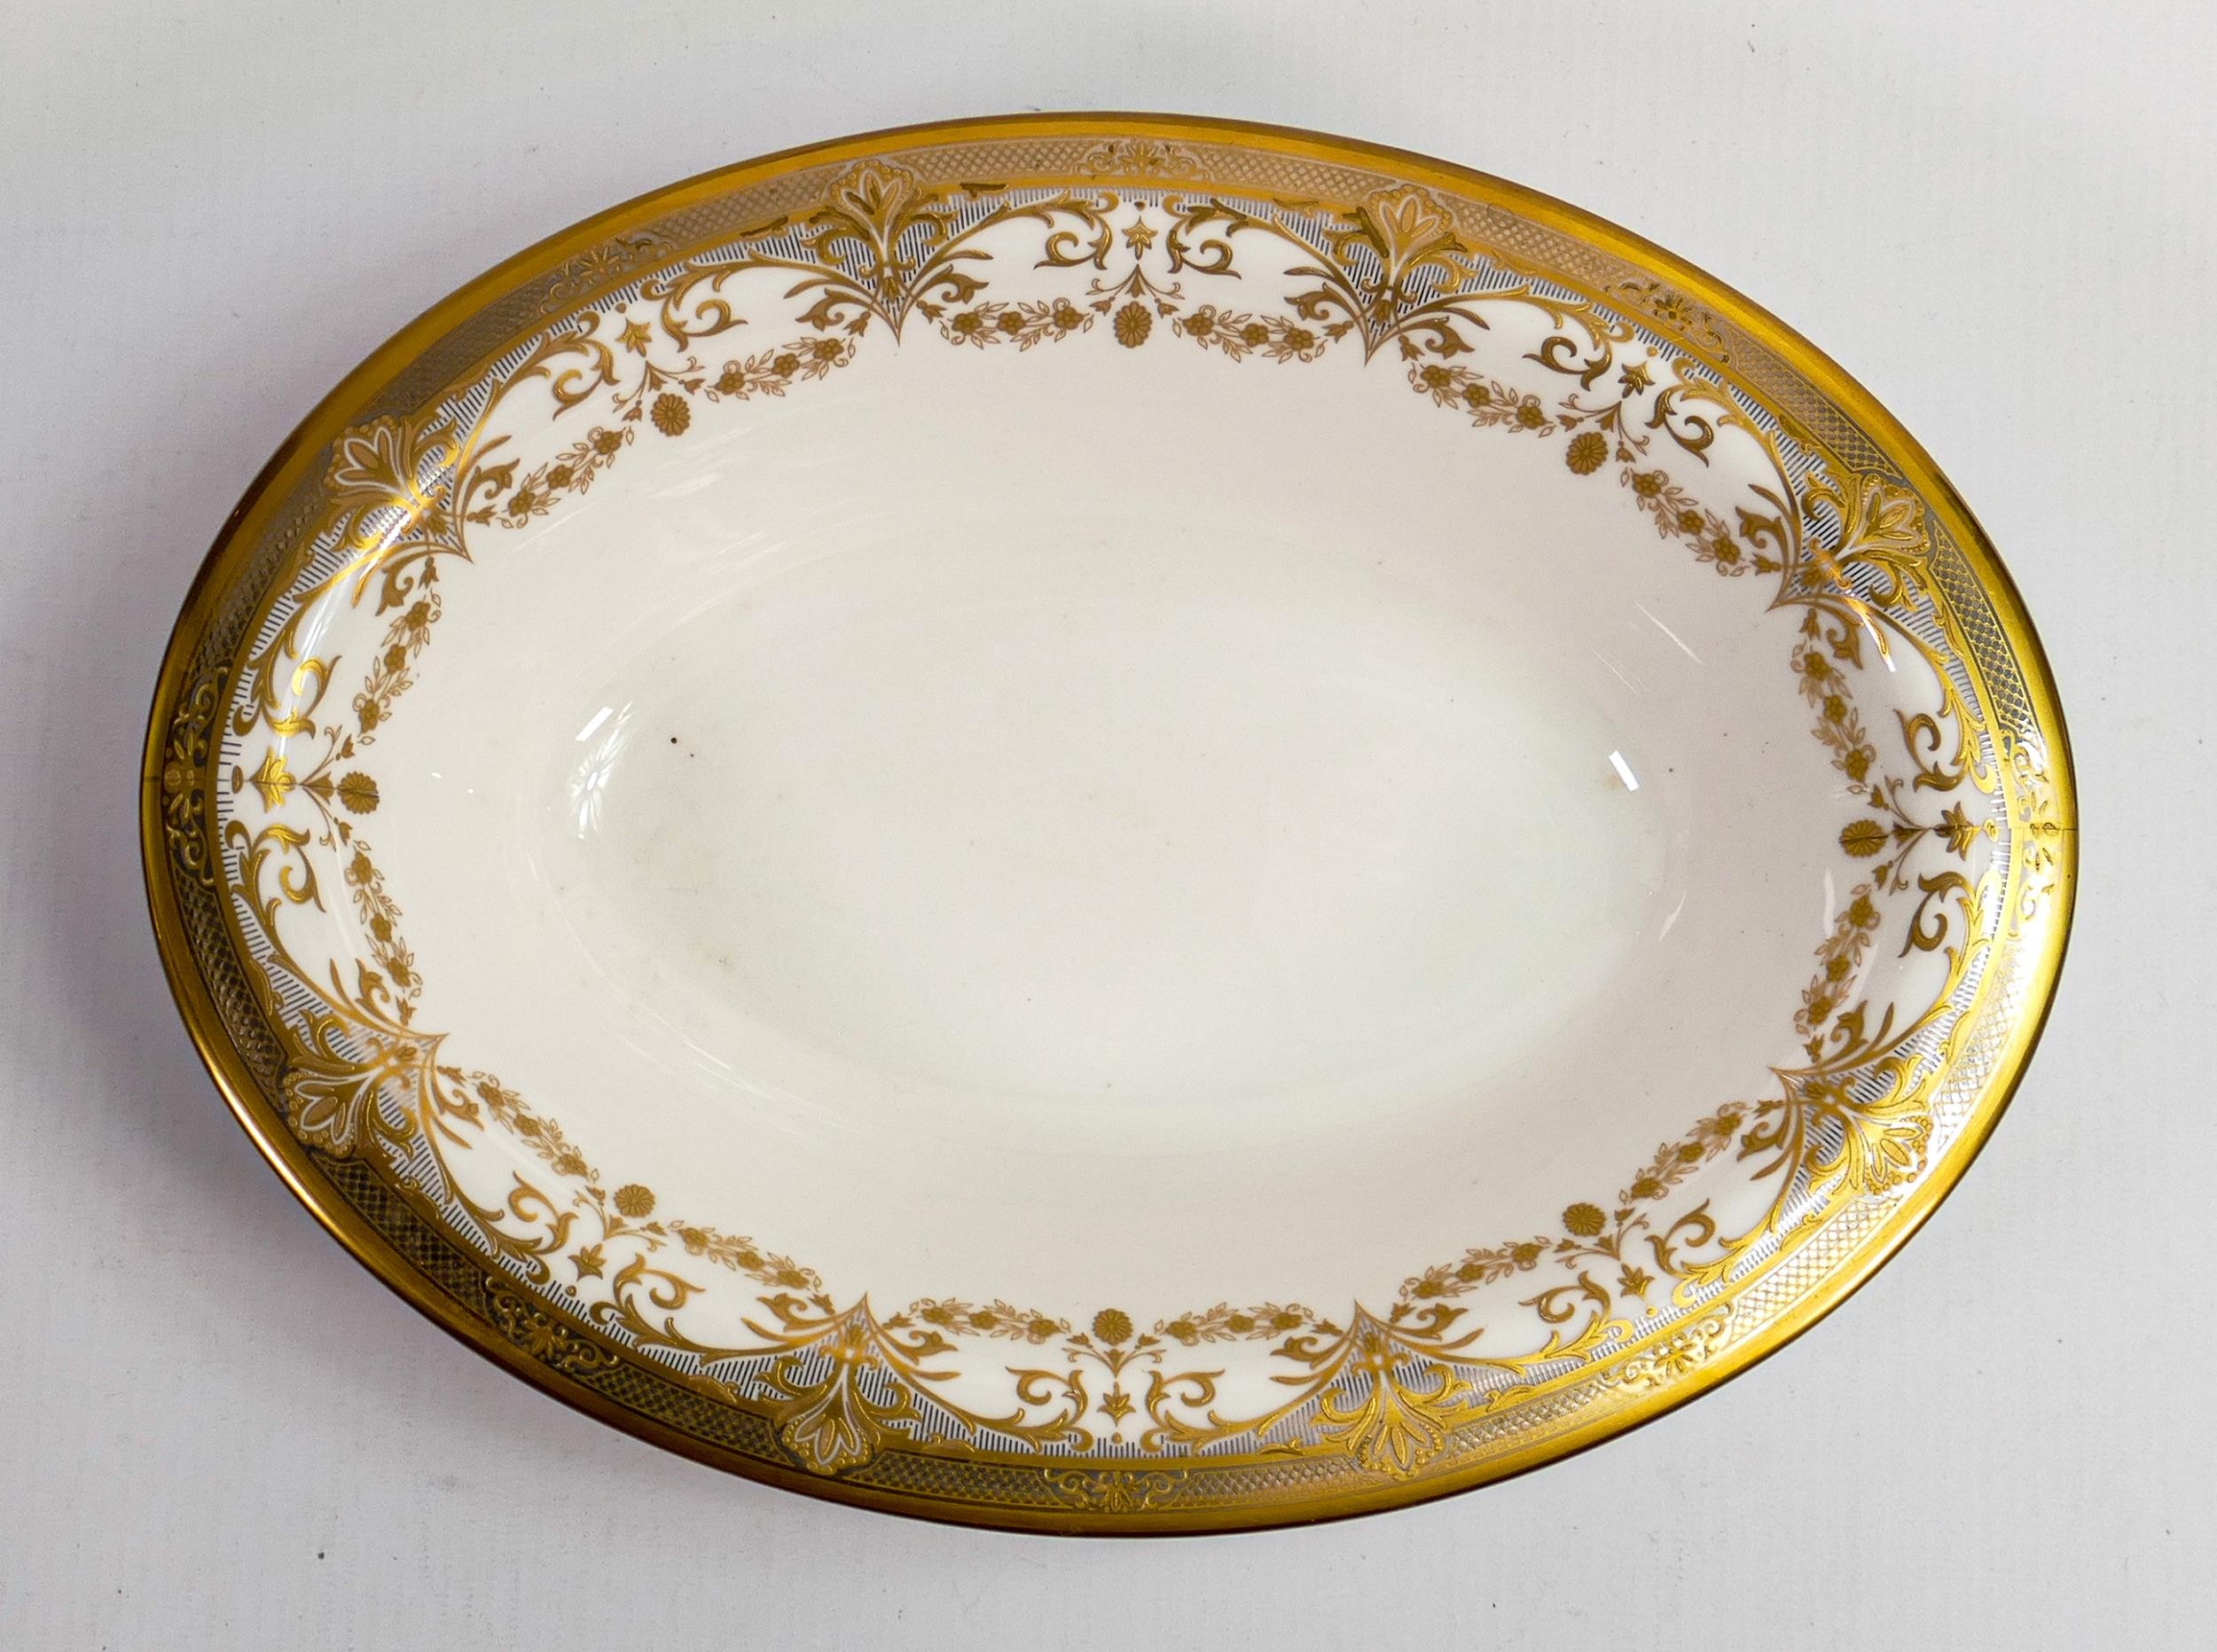 De Lamerie Fine Bone China Chatsworth Garland patterned oval open vegetable dish, specially made - Image 3 of 3